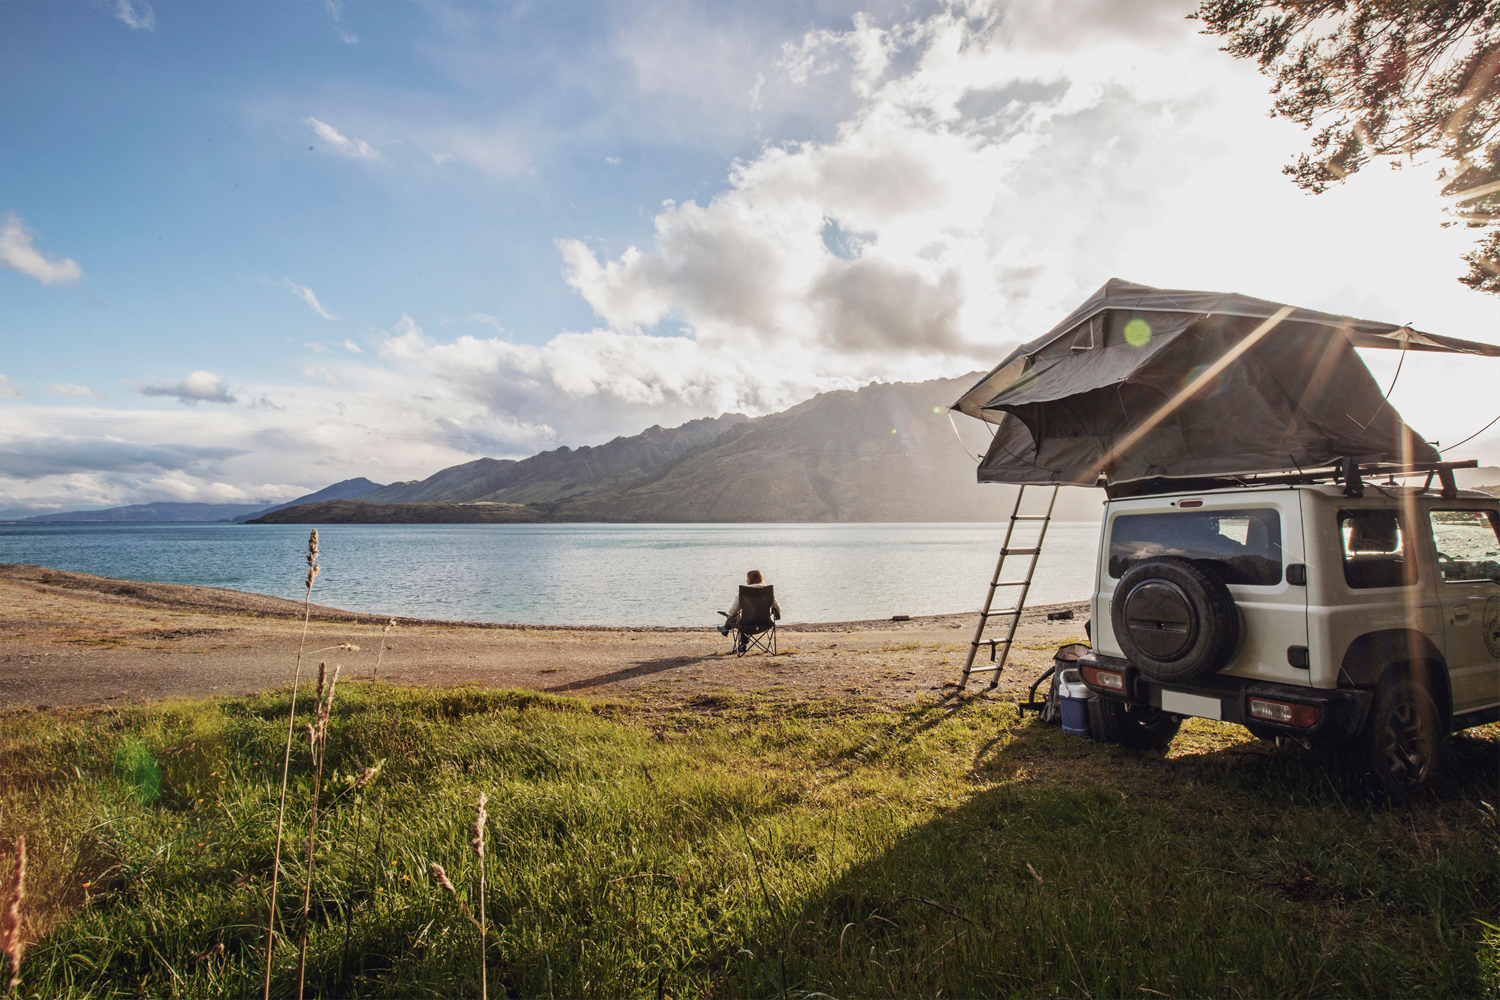 A brief history of the rooftop tent